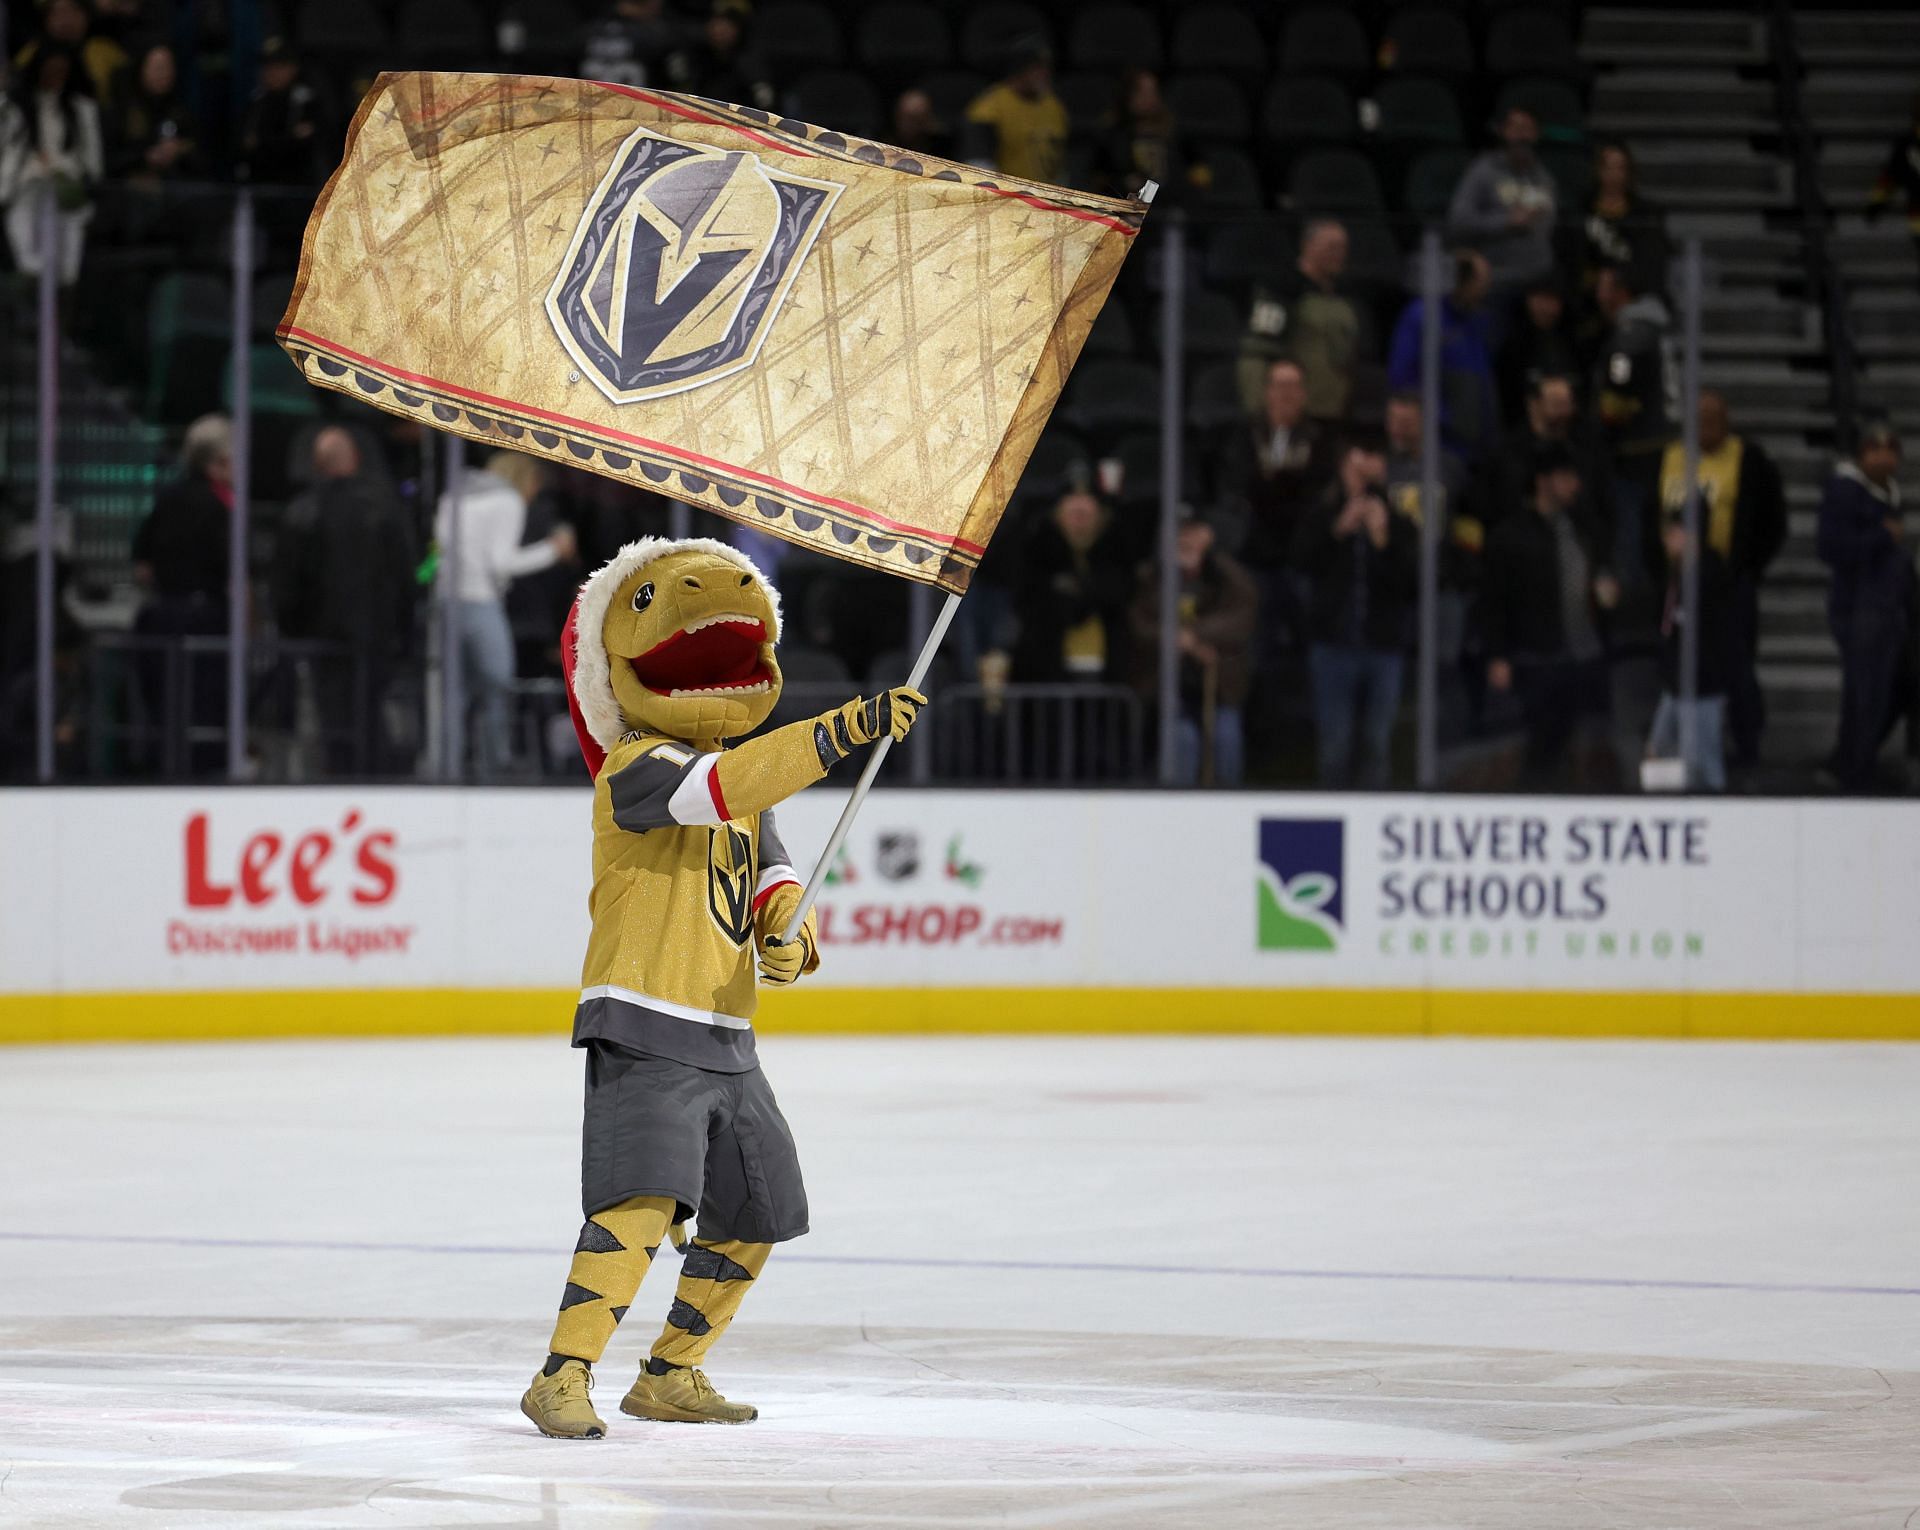 What Is Chance Checking Out? Here's What the Vegas Golden Knights Mascot  Loves About the Library!